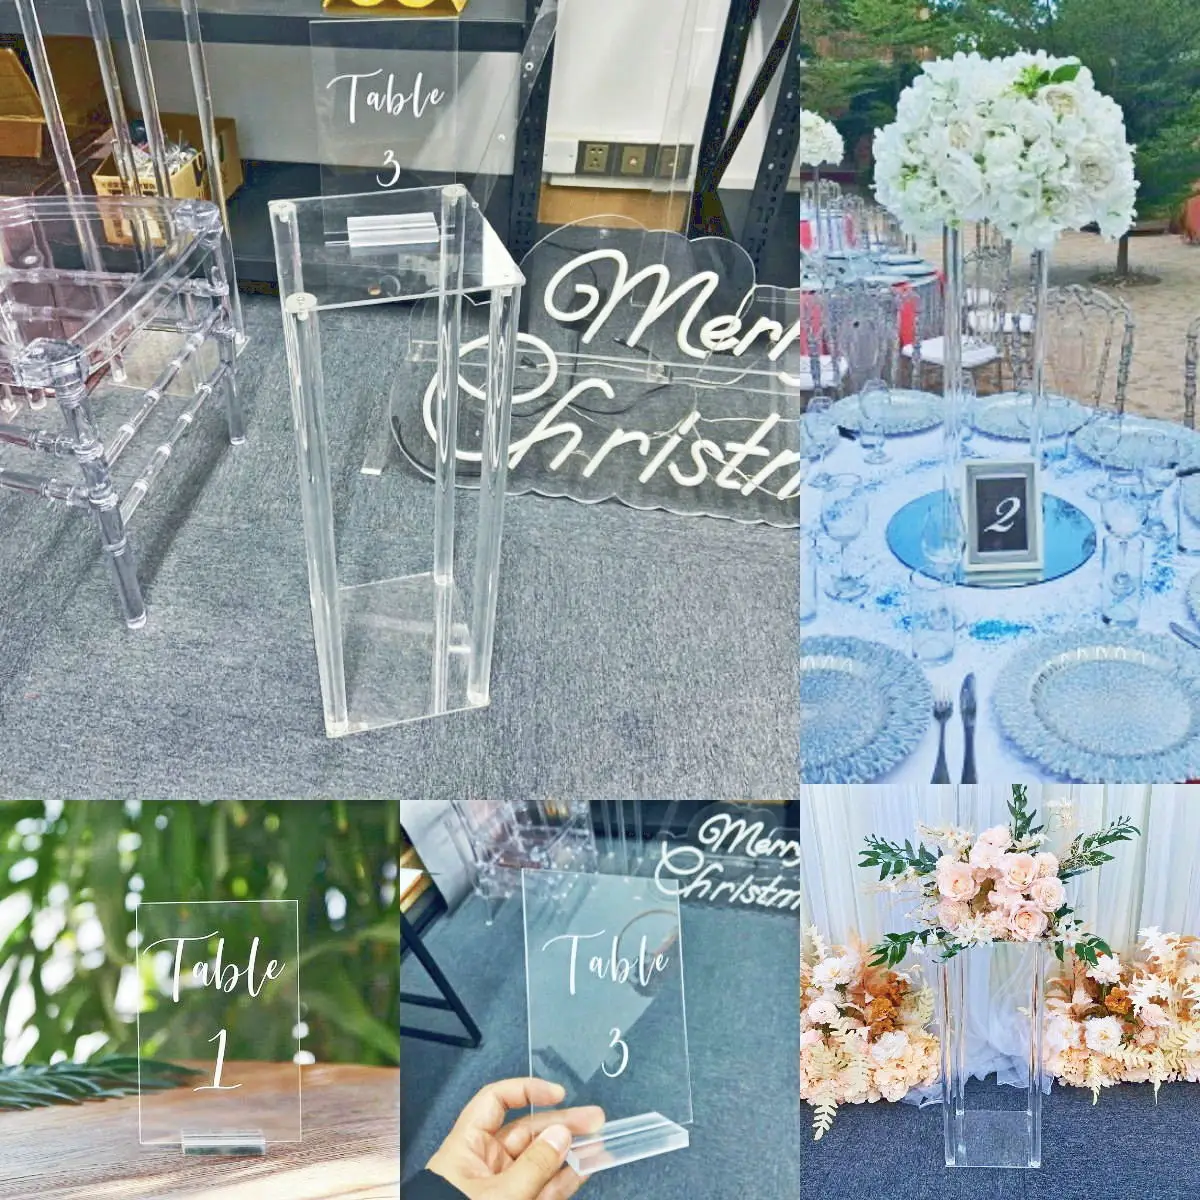 10PCS Acrylic Column Pillar Stand Wedding Flower Table Centerpiece Clear Plinth Dessert Fruit Cake Holder With Table Number Sign